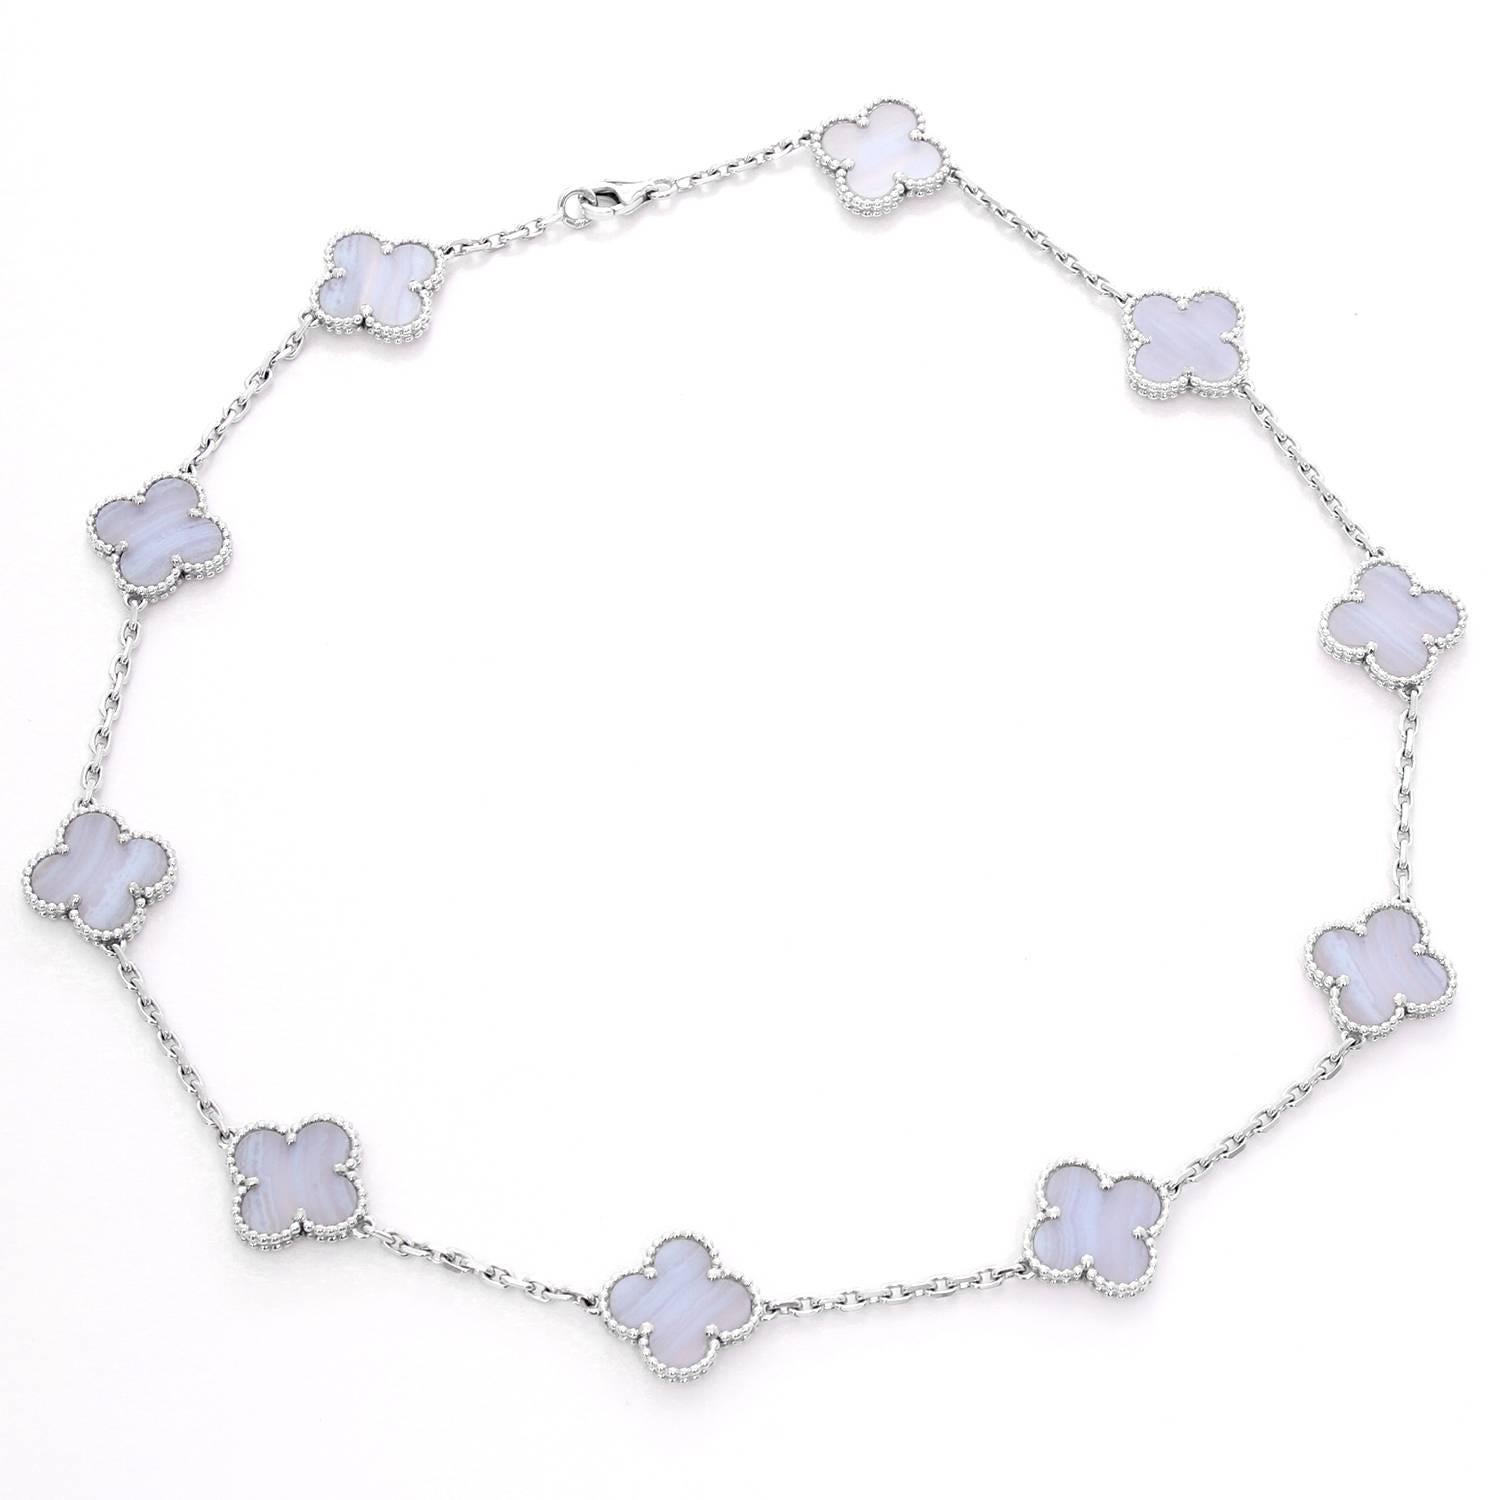 Van Cleef & Arpels Vintage Alhambra 10 Motifs - . Beautiful Vintage Alhambra Van Cleef & Arpels Necklace. 10 Motifs set in White gold. Made of Chalcedony. Total weight 22.4 grams.